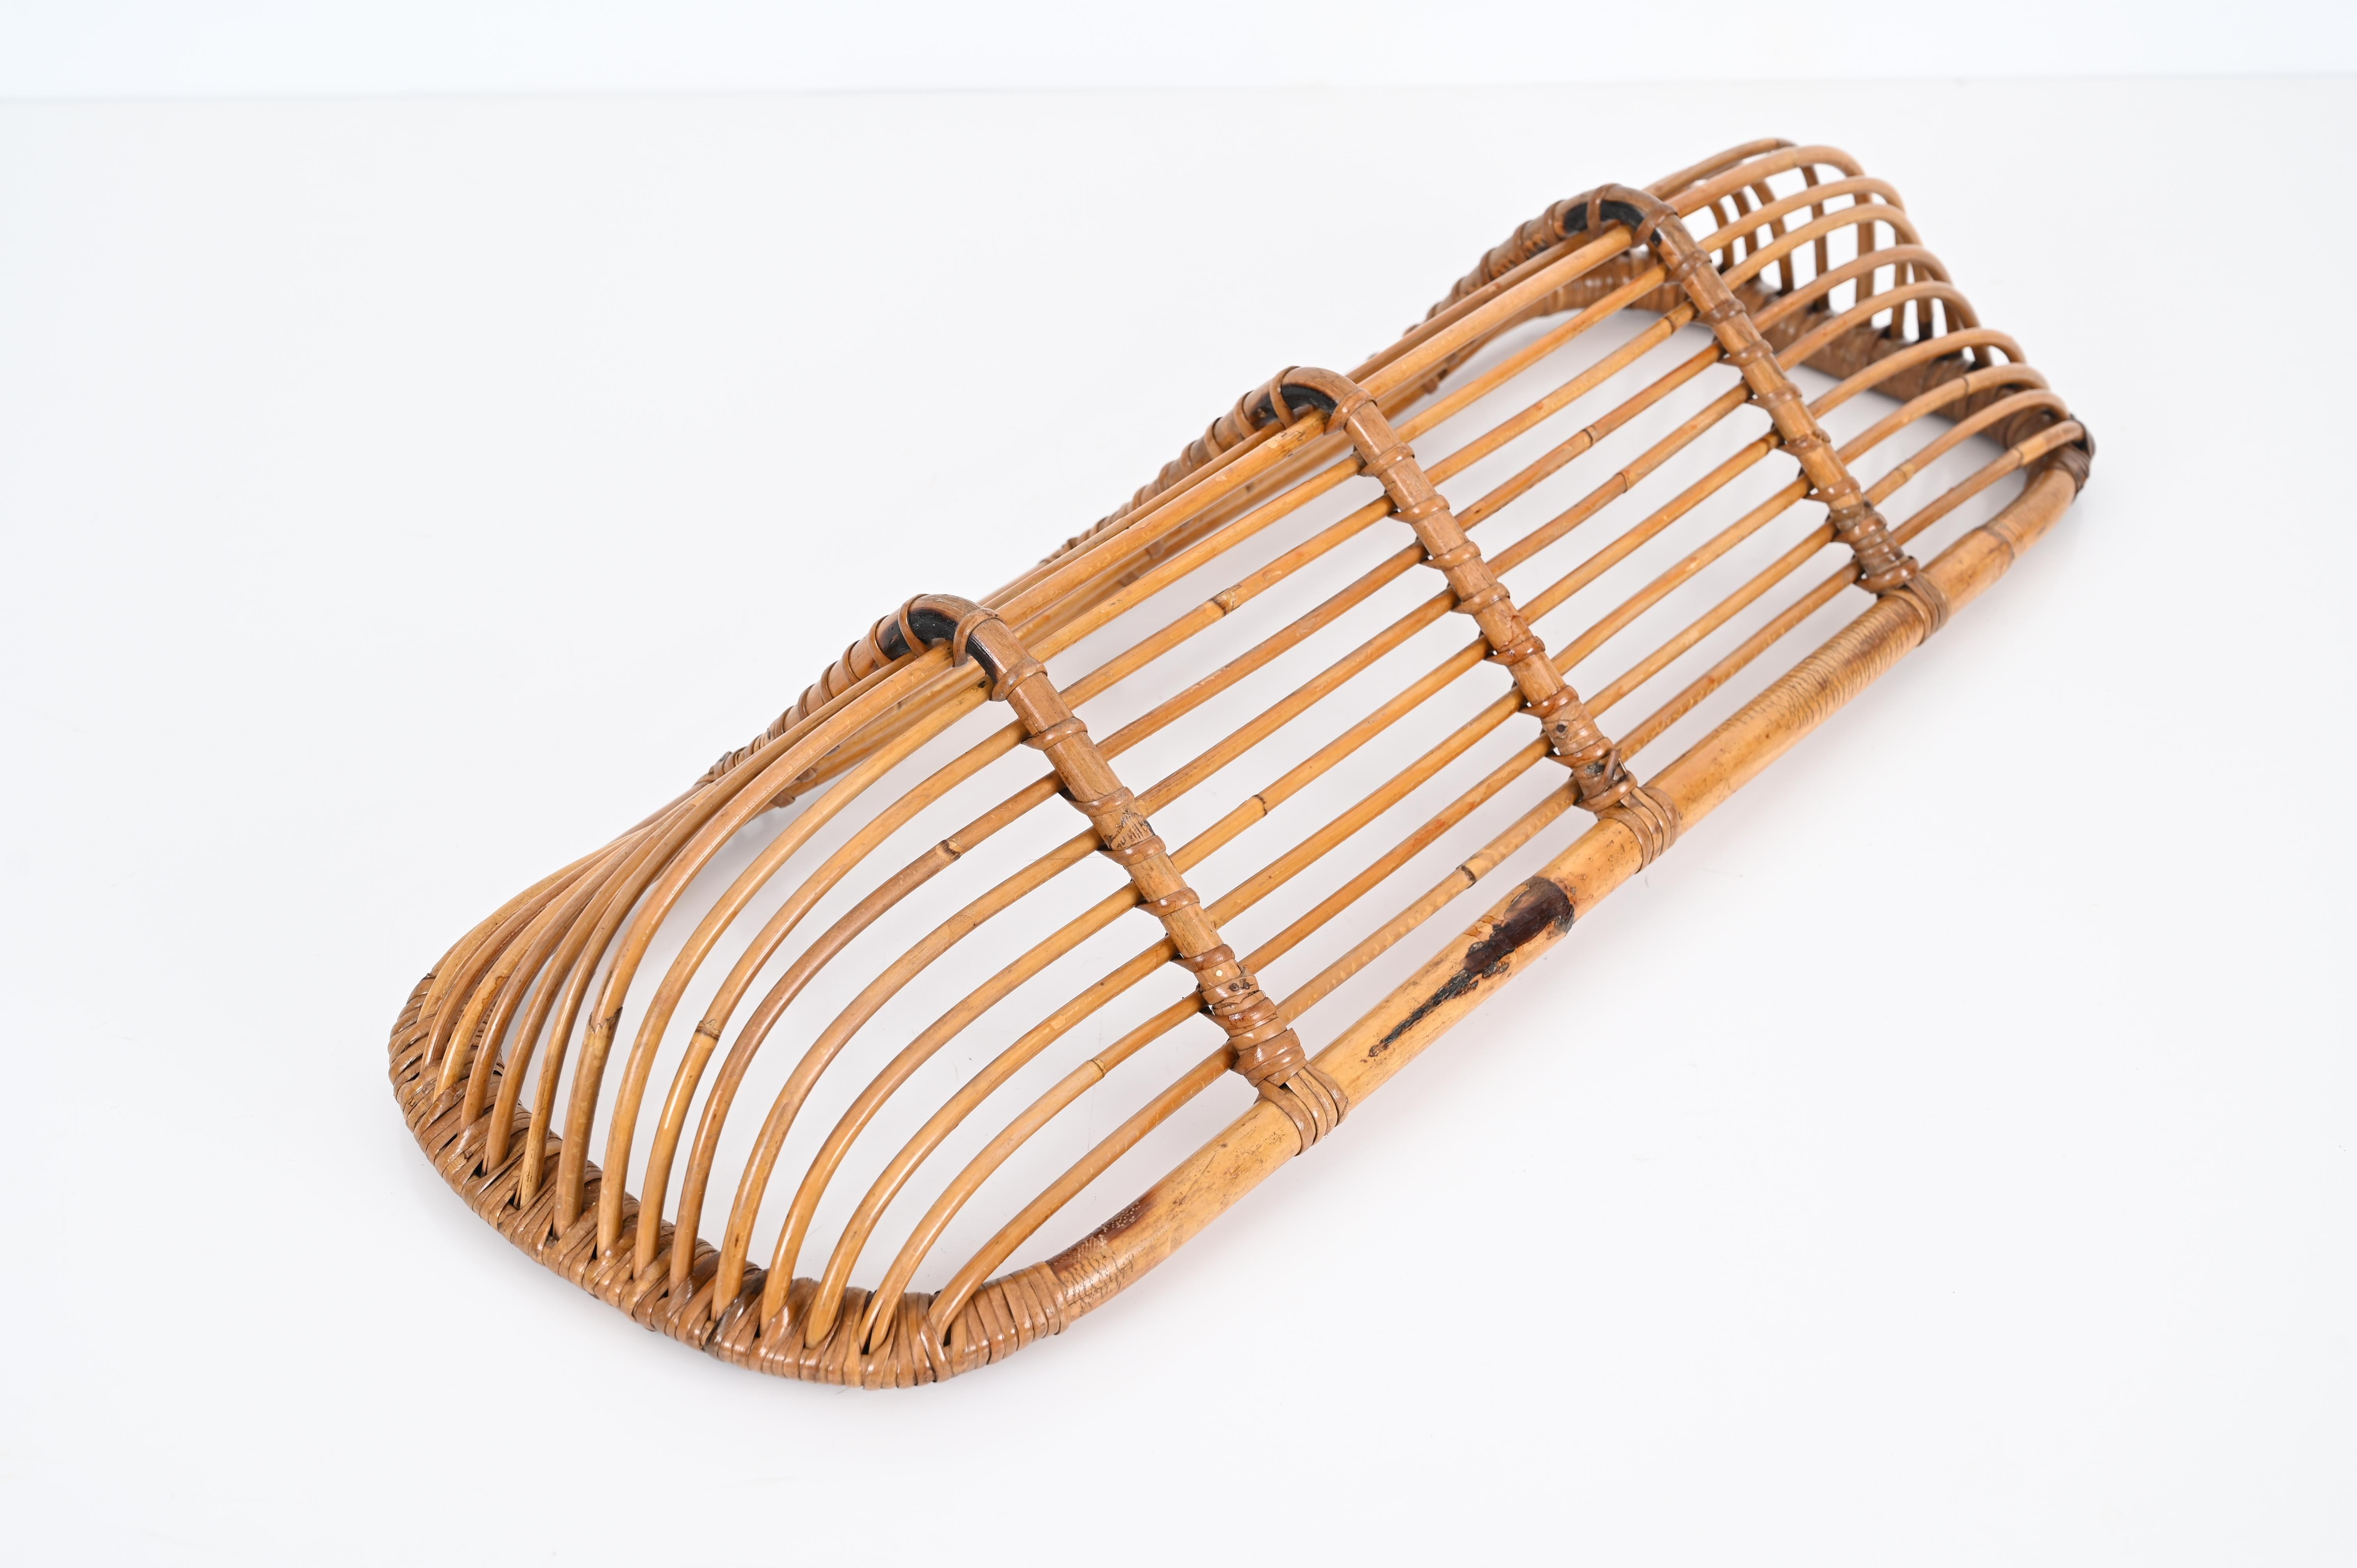  Franco Albini Mid-Century Wall Shelf in Rattan and Bamboo, Italy, 1960s For Sale 7